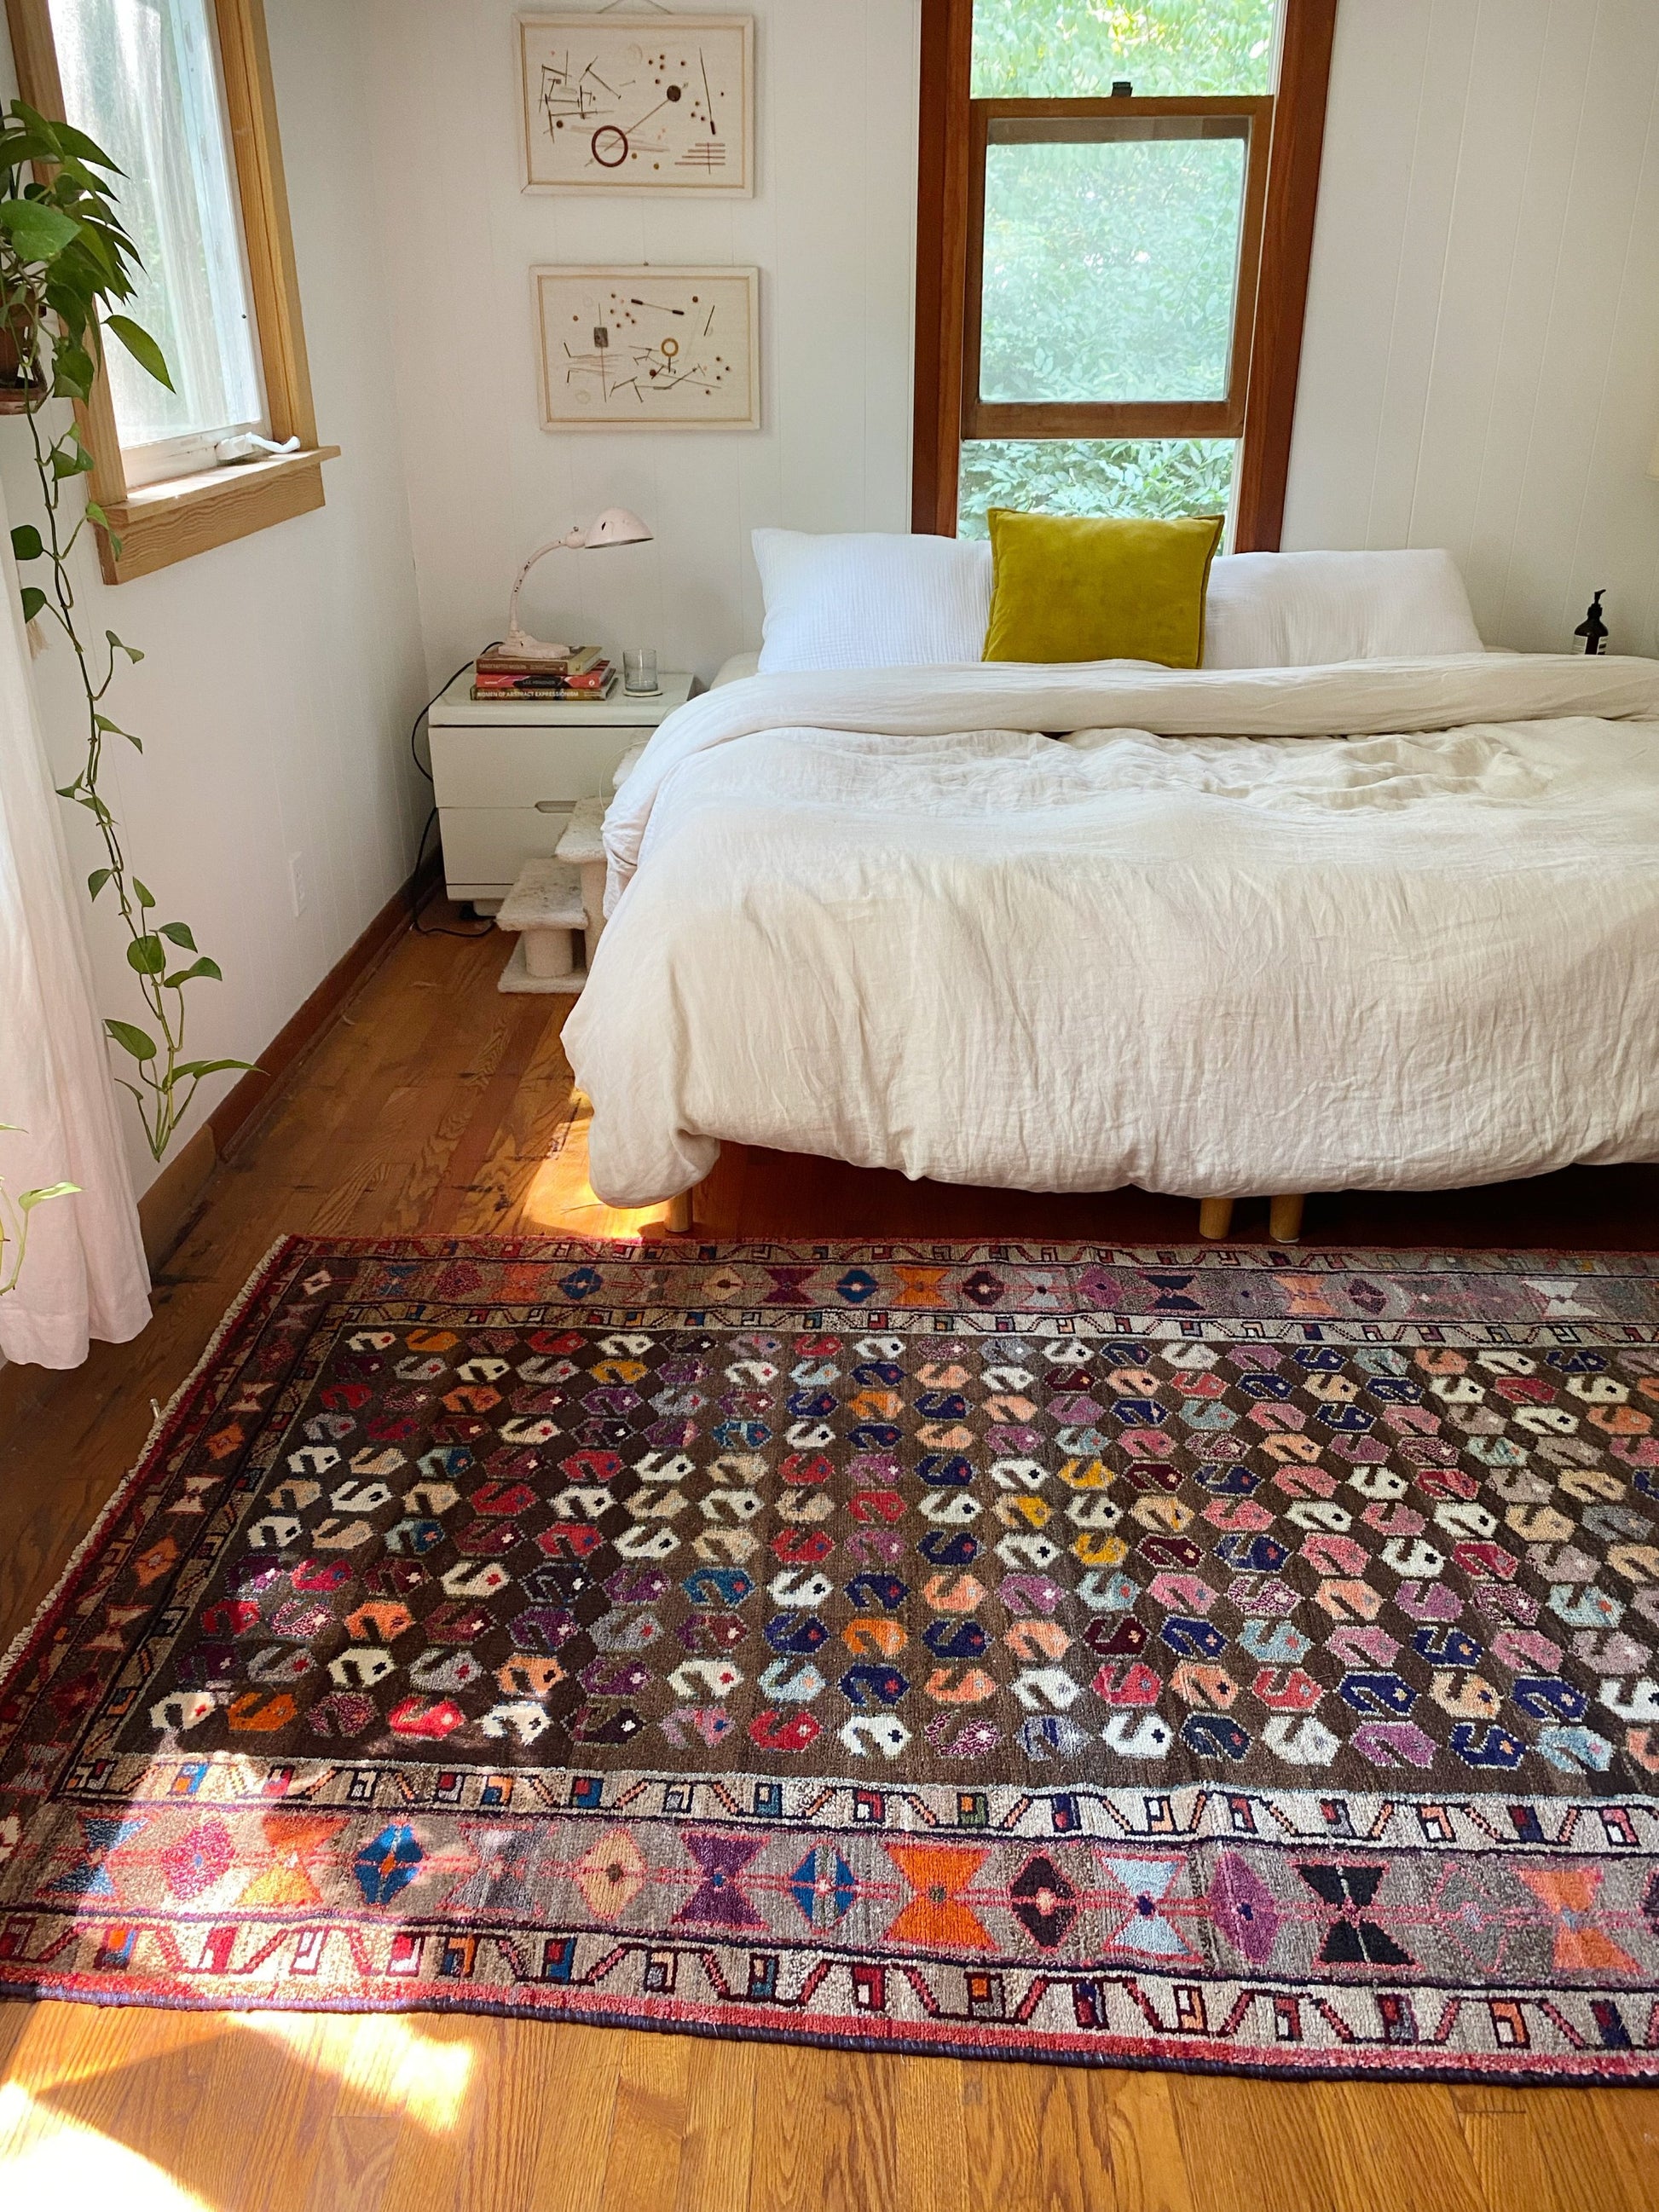 vintage persian area rug in a bedroom with a king size bed. 